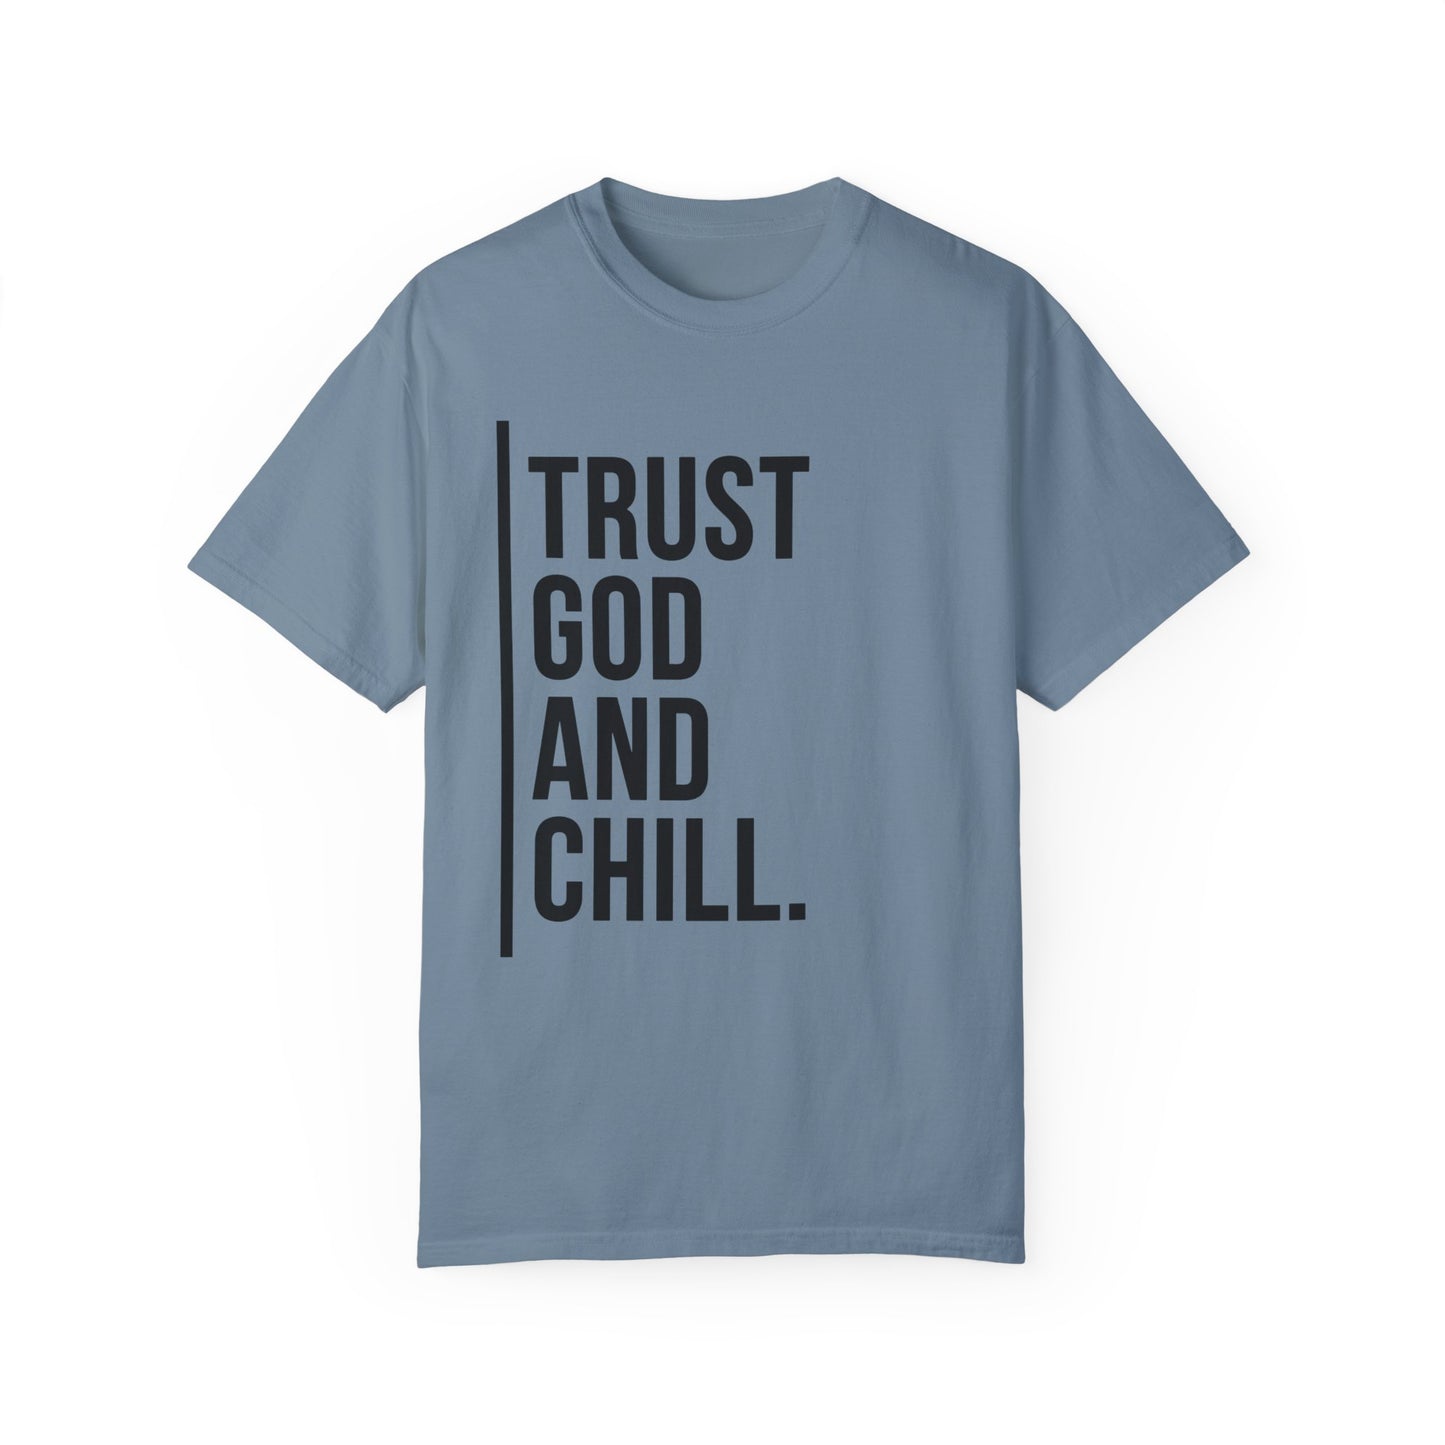 Trust God and Chill Unisex Garment-Dyed T-shirt